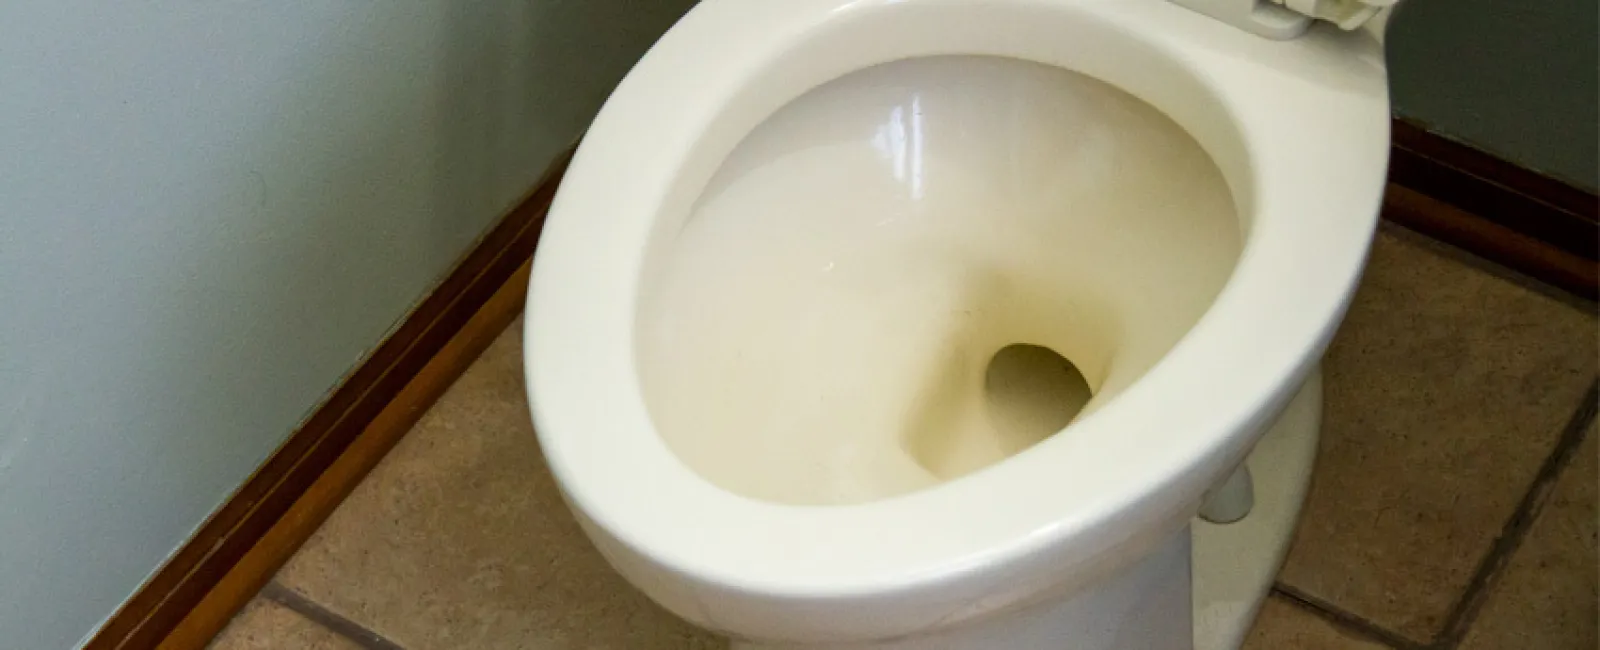 Why Does My Toilet Smell So Bad?